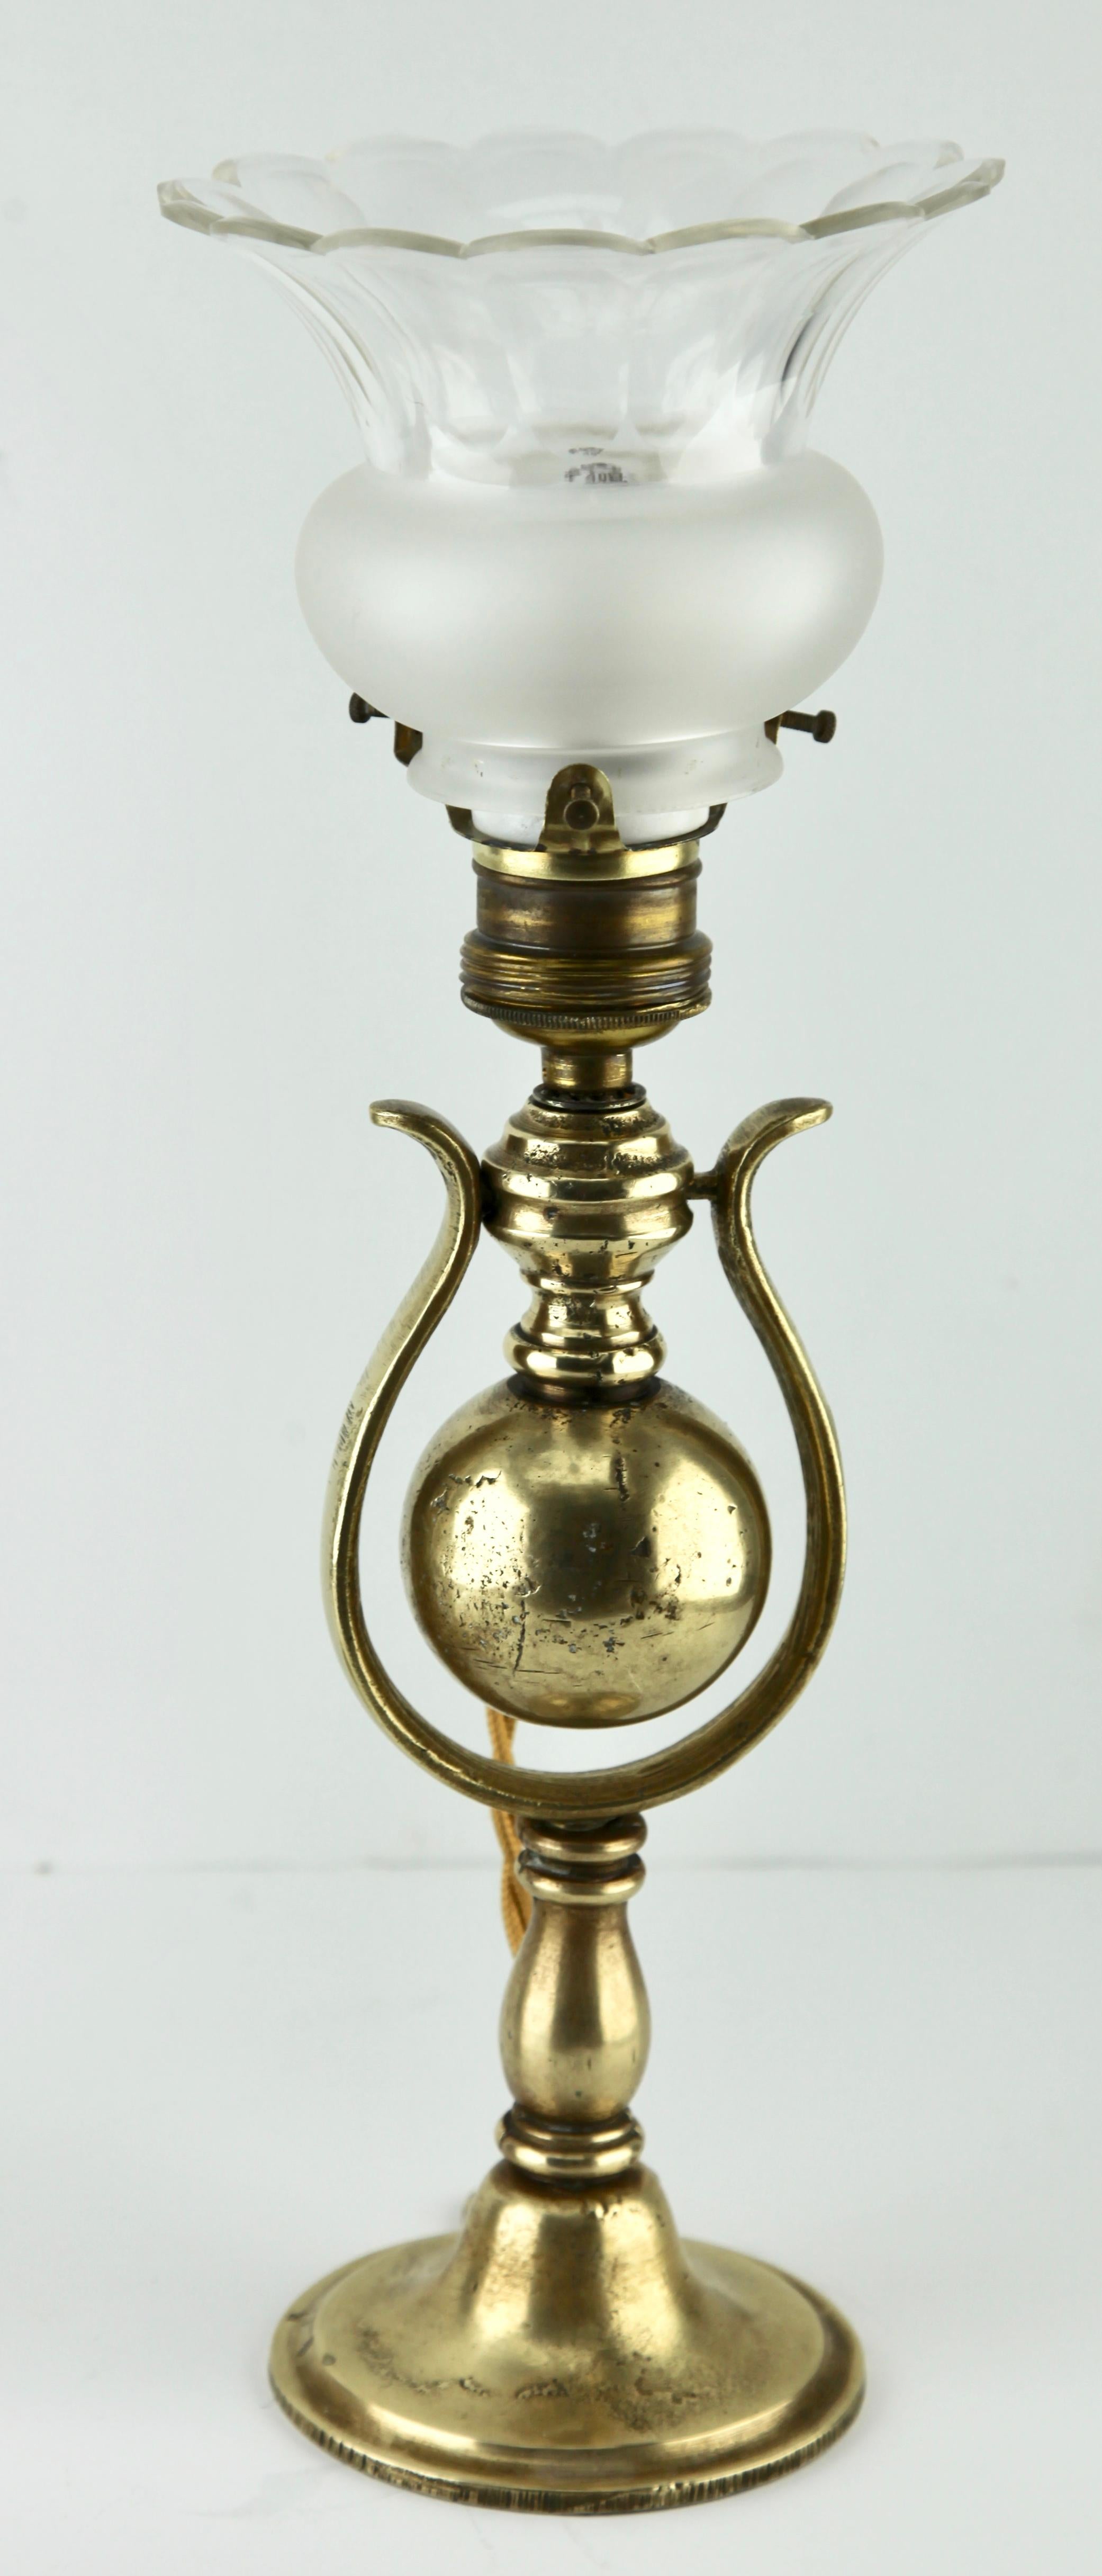 Early 20th Century Period Brass Ship's Wall Lamp with Weighted Gimble and Milk-Glass Lampshade